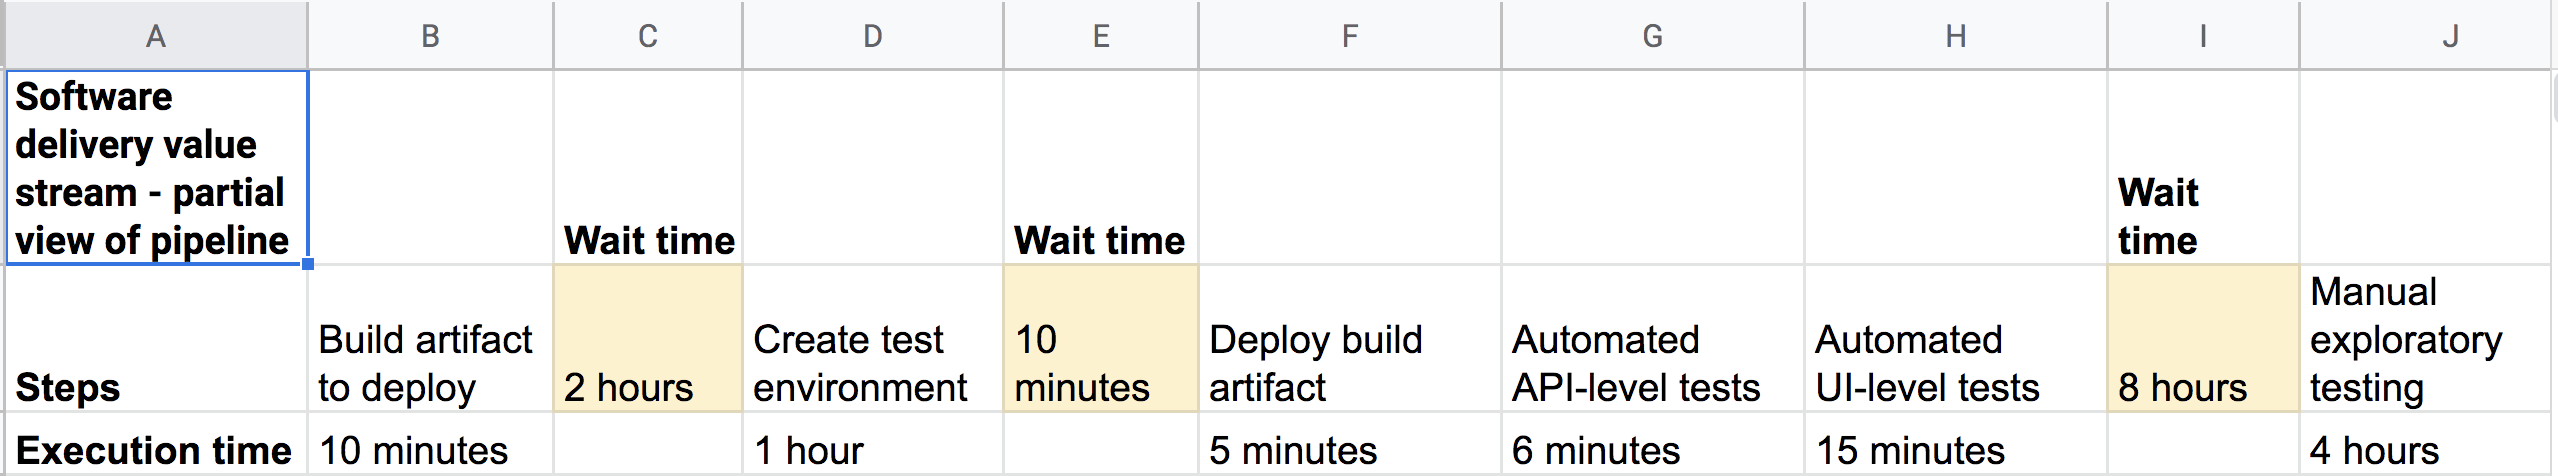 Example value stream map showing steps to build, create test environment, deploy build artifact, run test suites, manual exploratory testing, times for each activity and wait time sin between